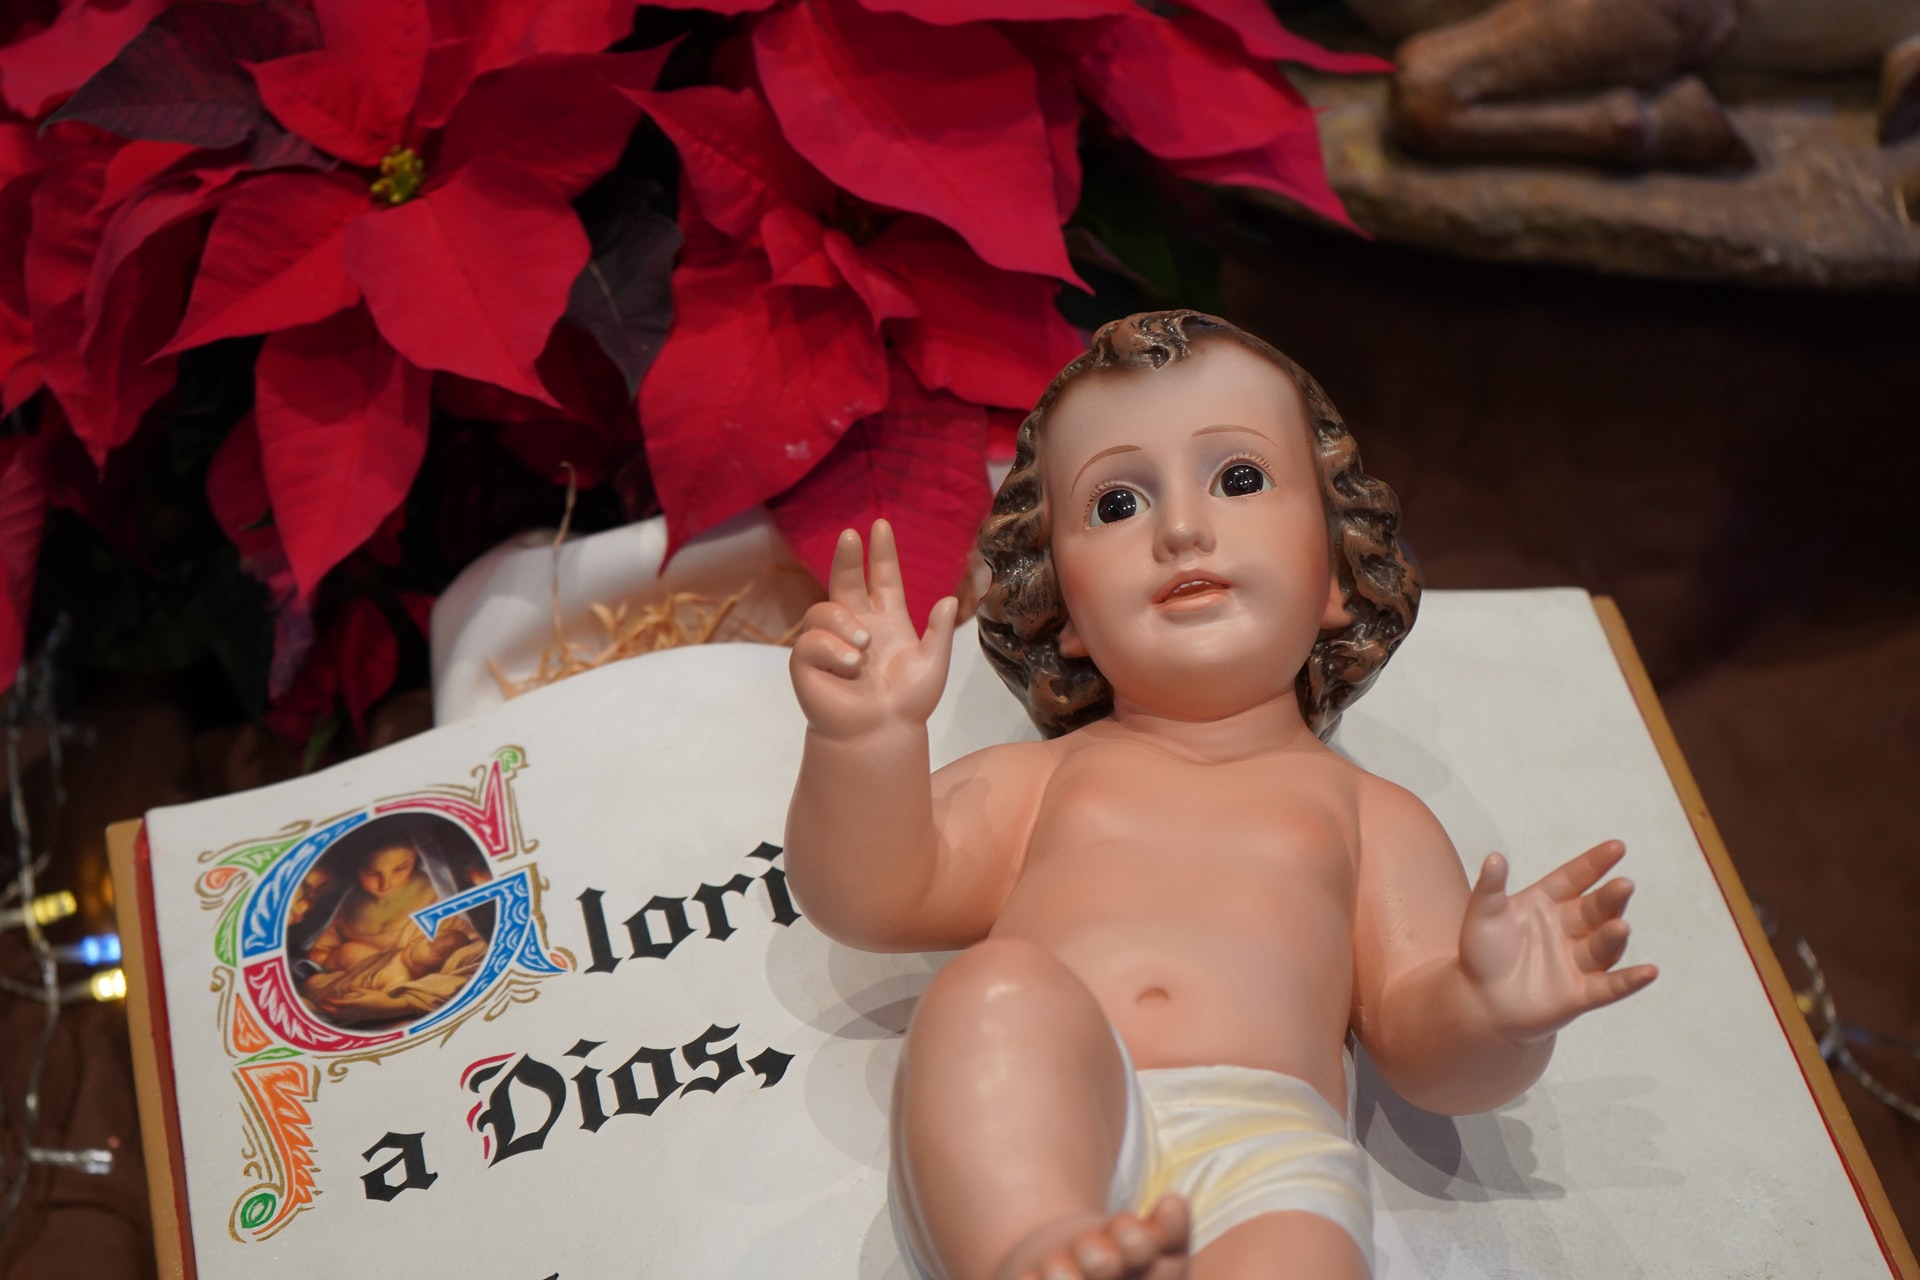 A statue of the Infant Jesus lying on top of a Bible. The Bible is opened to page saying "Glory to God" in Spanish.